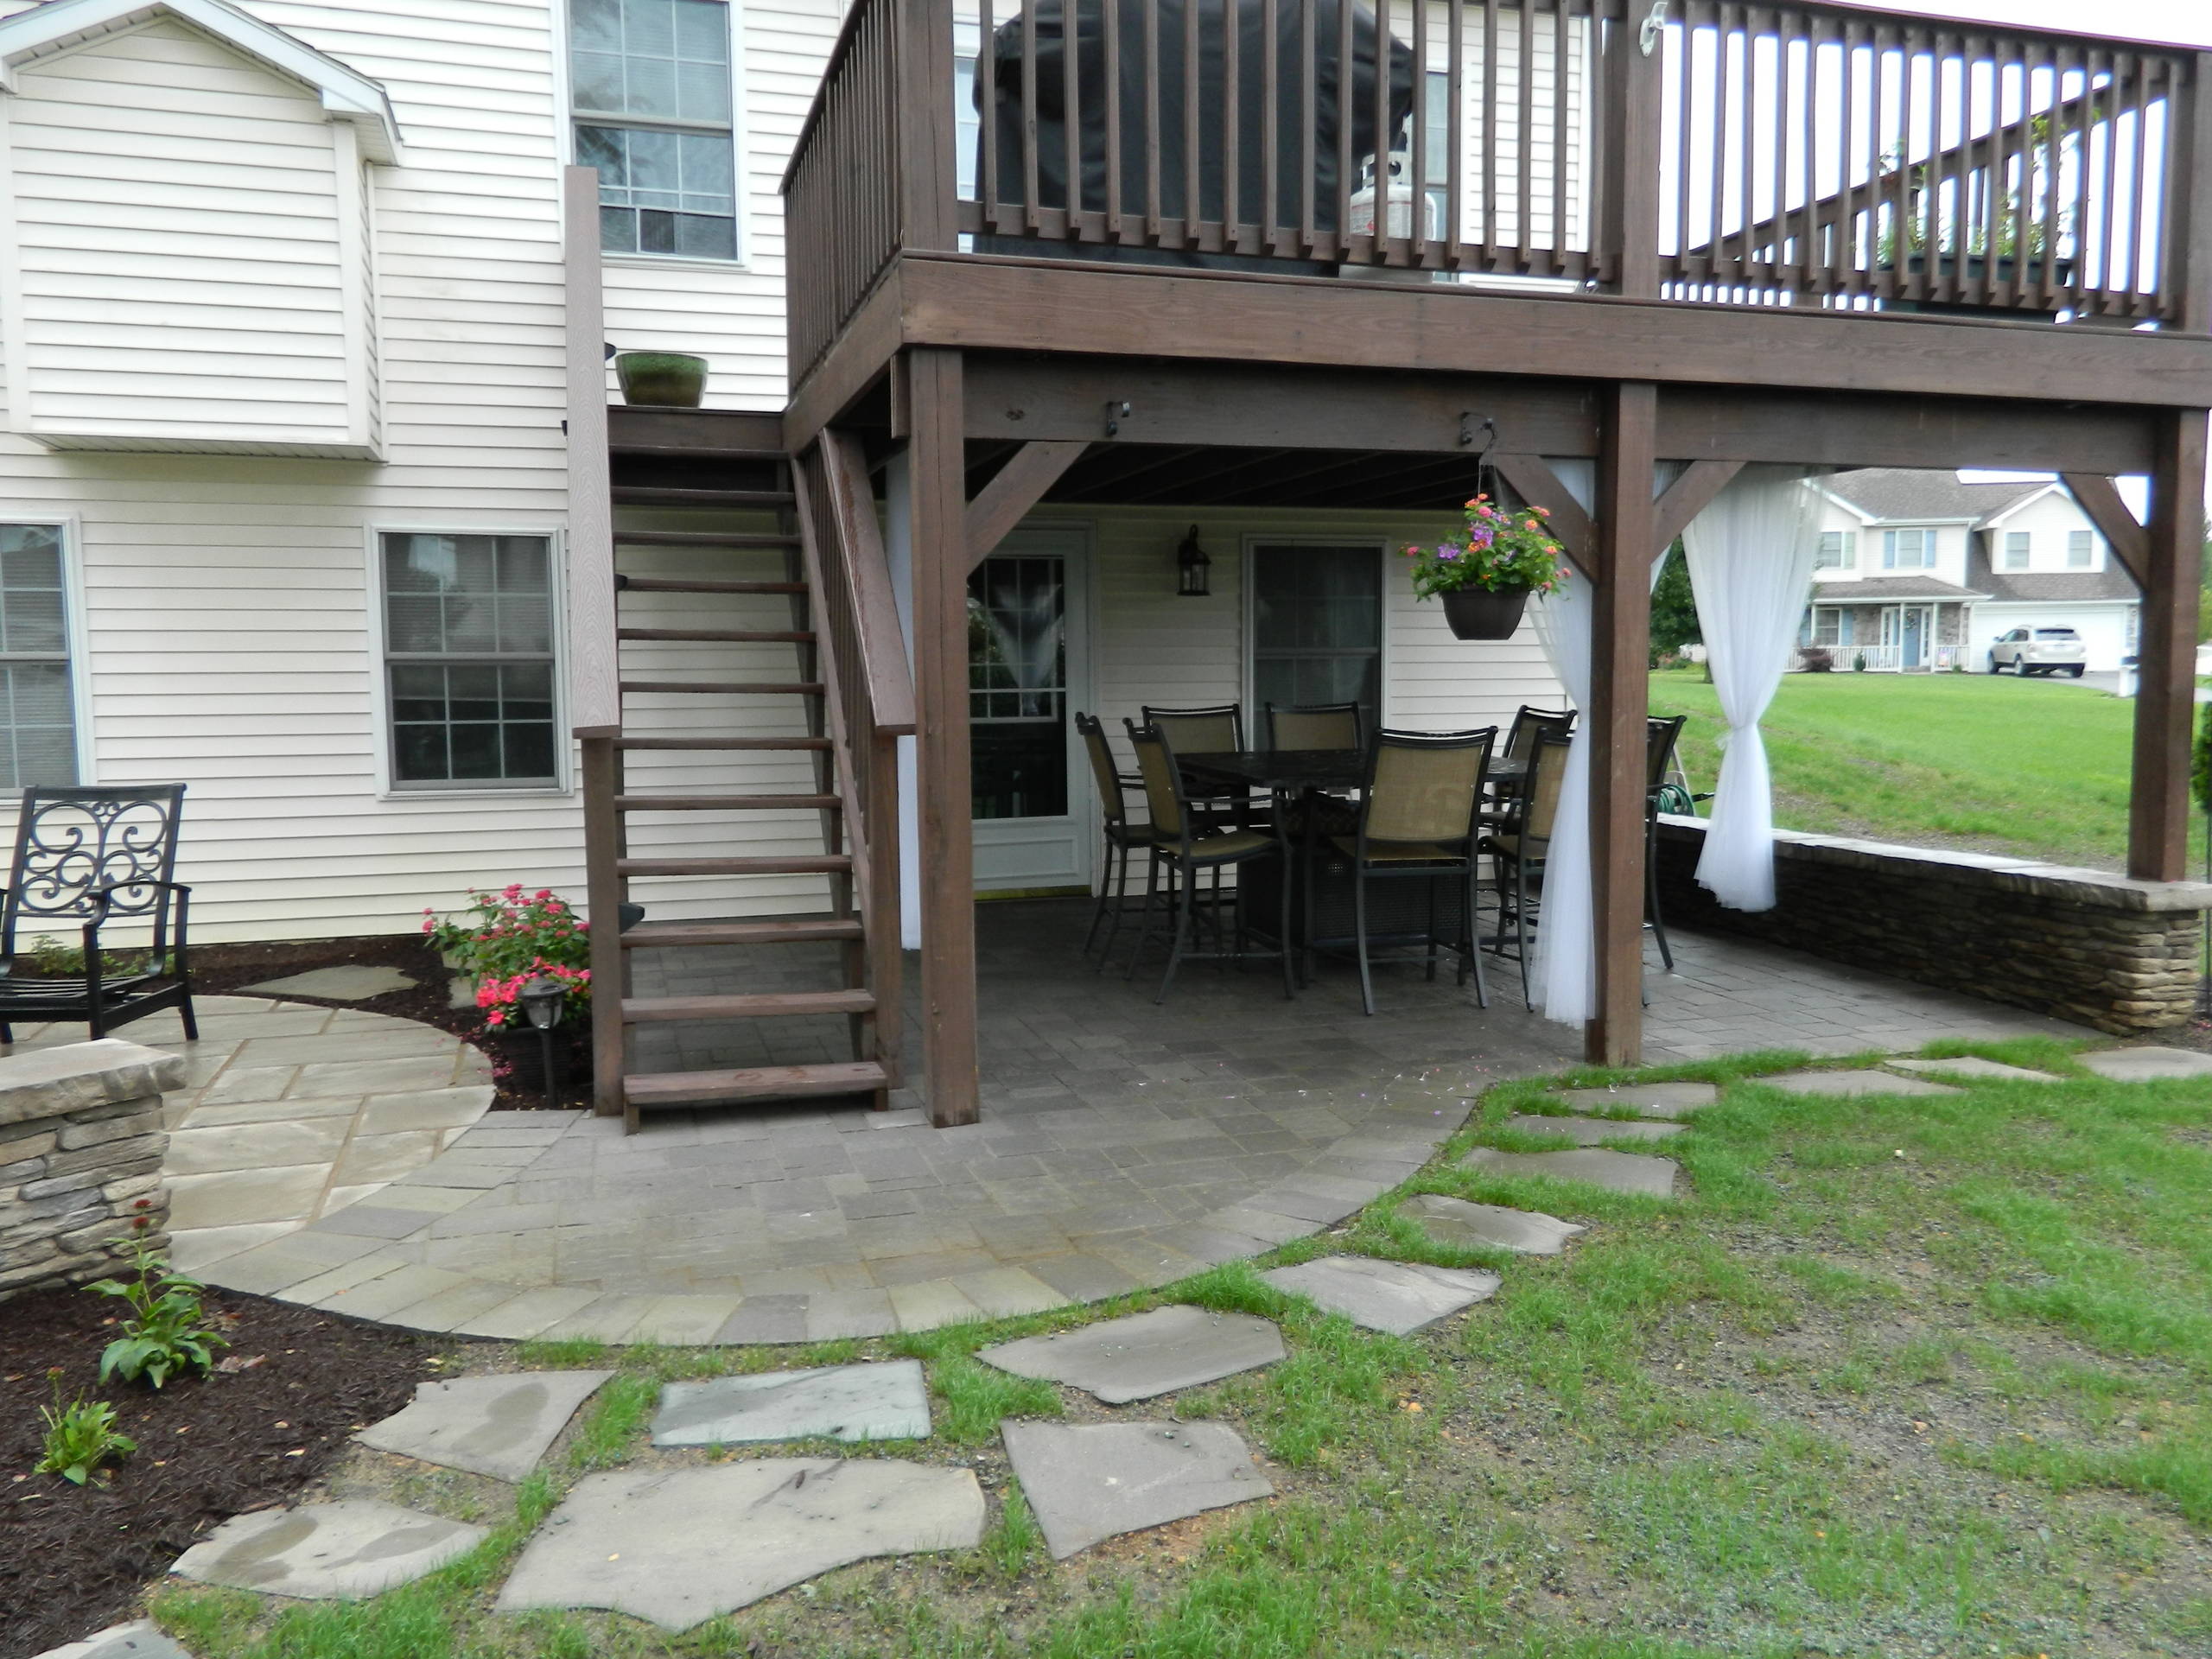 Patio Under Deck With Separate Firepit, Can You Have A Fire Pit Under Patio